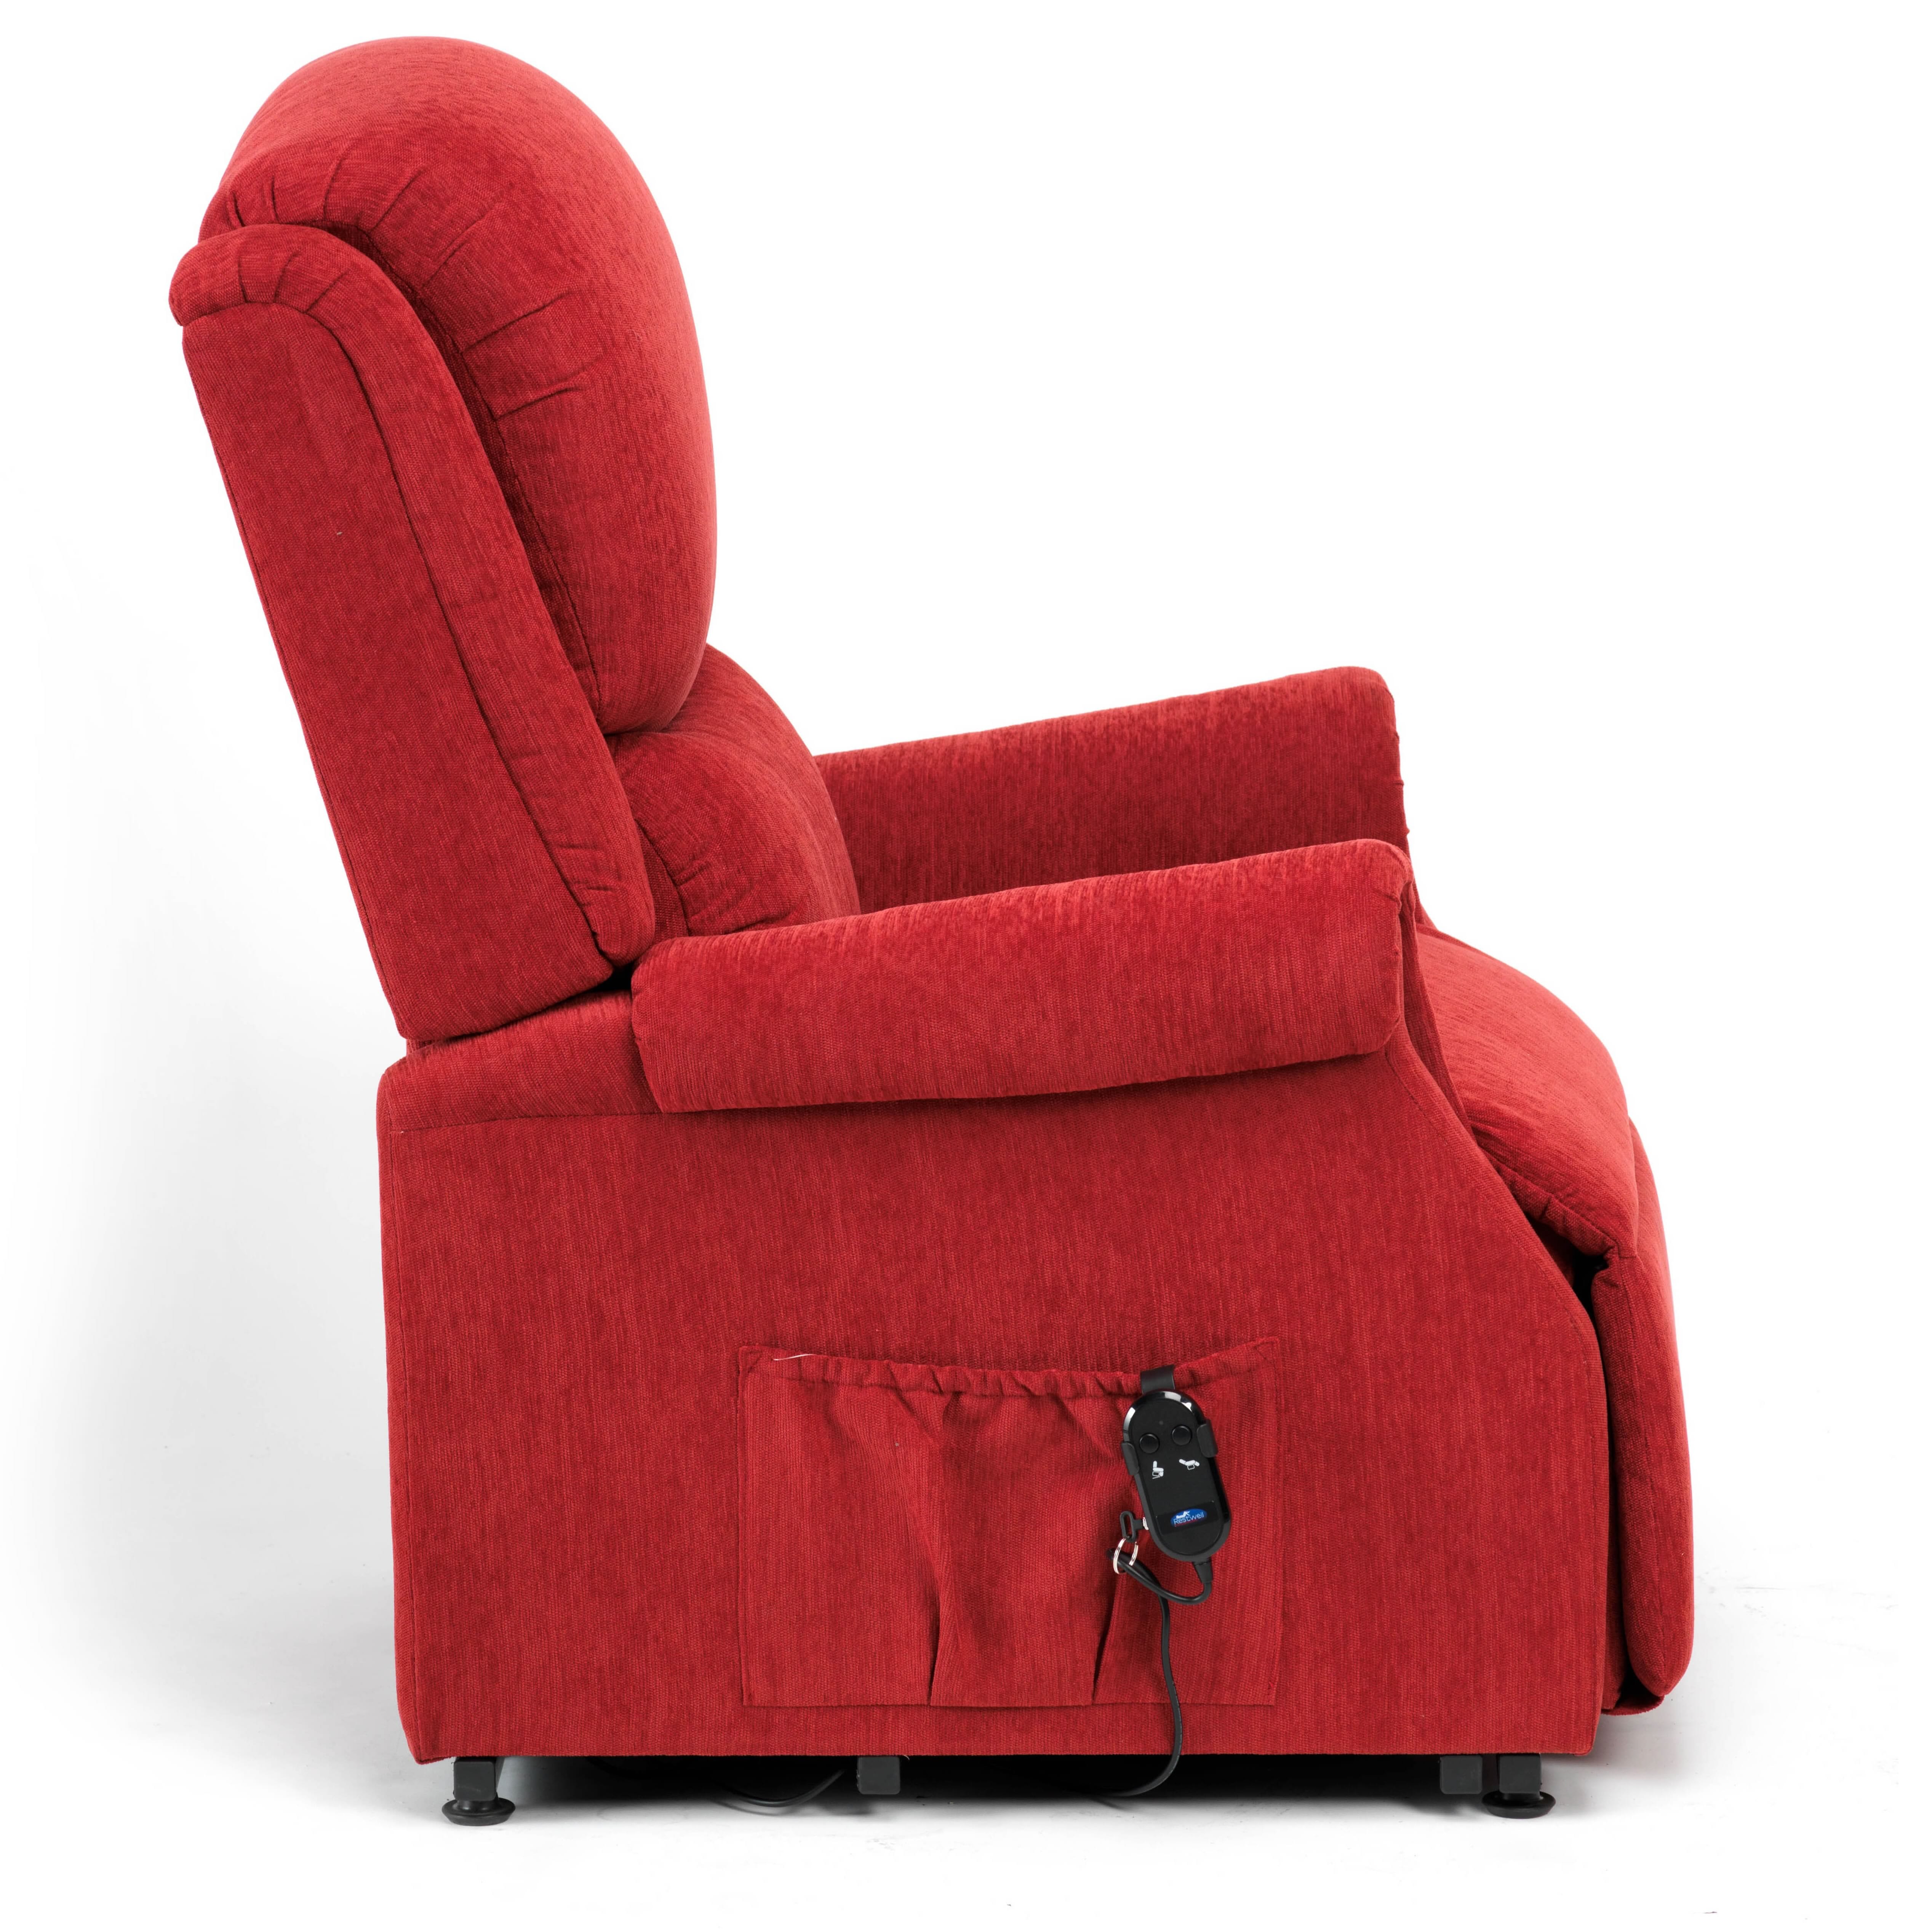 View Indiana Rise and Recline Chair Petite Berry information